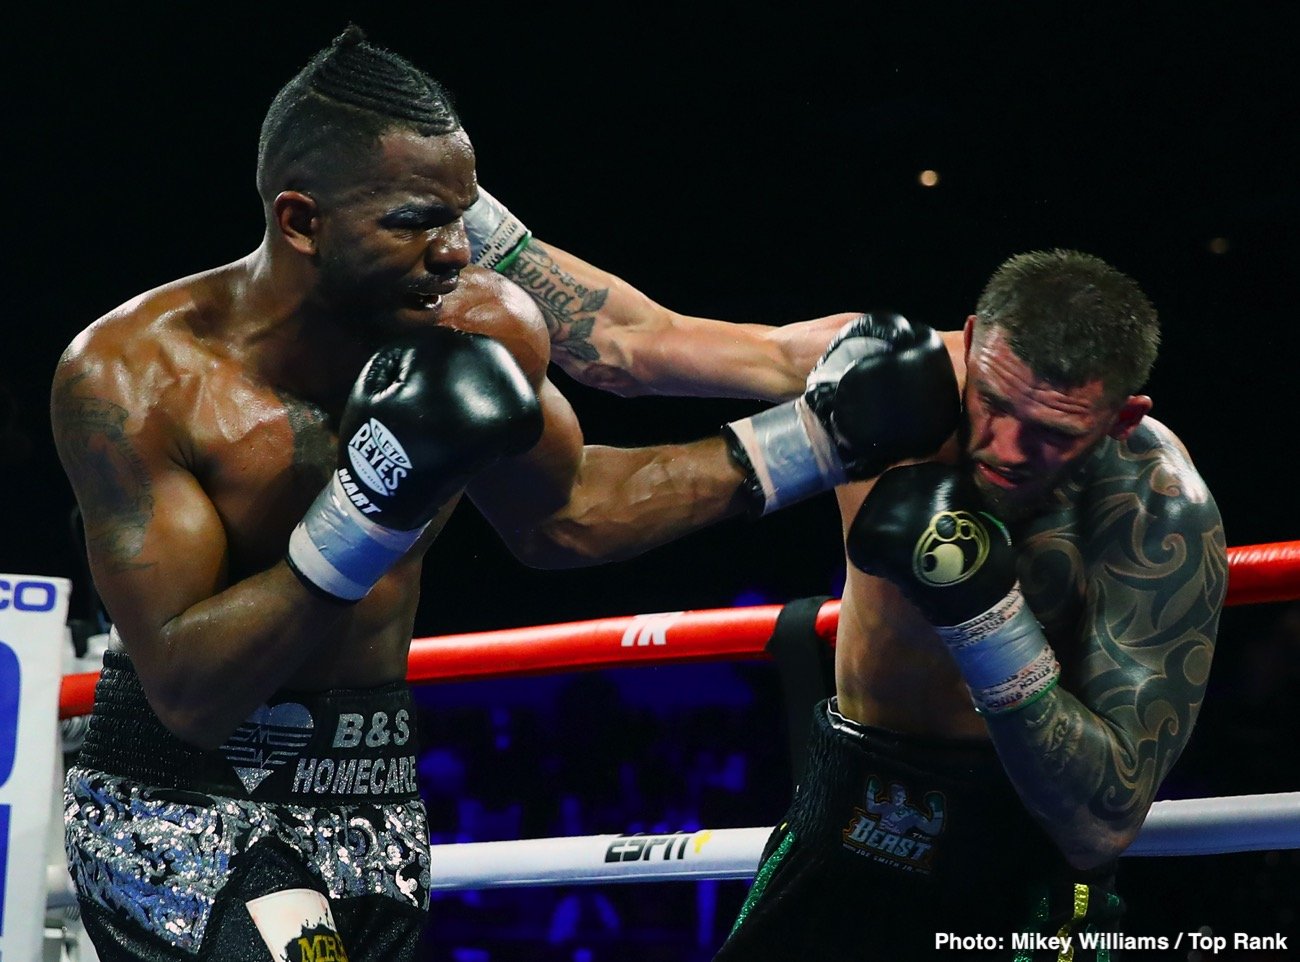 Smith Jr. W 10 Hart: The Terrible Scoring Of One Judge Should Not Take Anything Away From A Great Fight